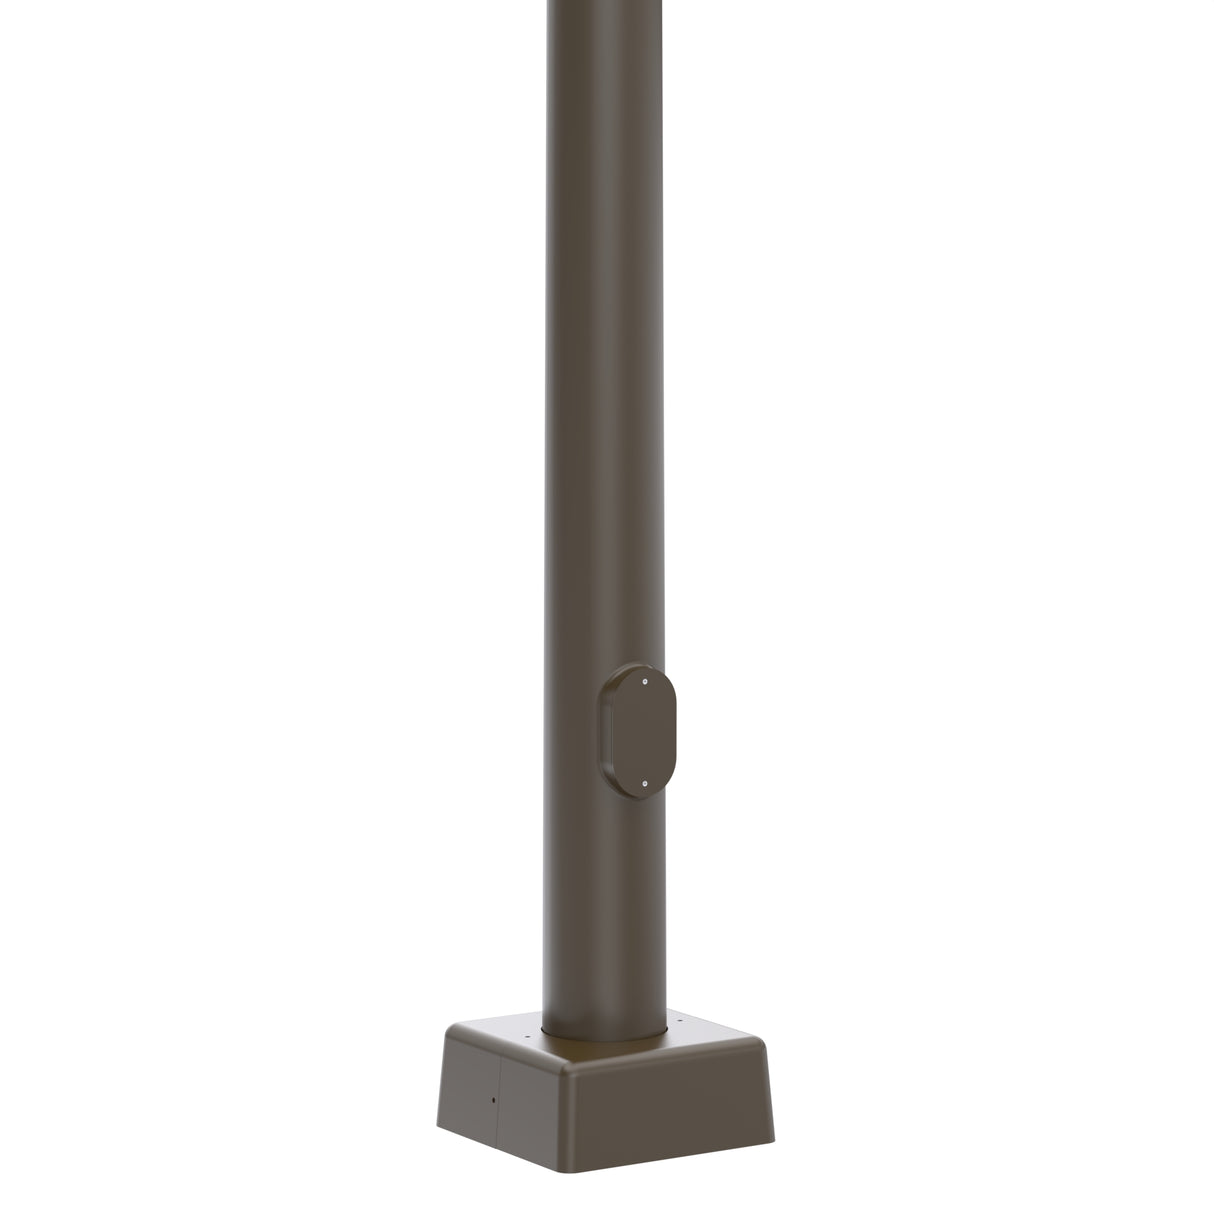 25' Tall x 7.0" Base OD x 3.5" Top OD x 11ga Thick, Round Tapered Steel, Anchor Base Light Pole